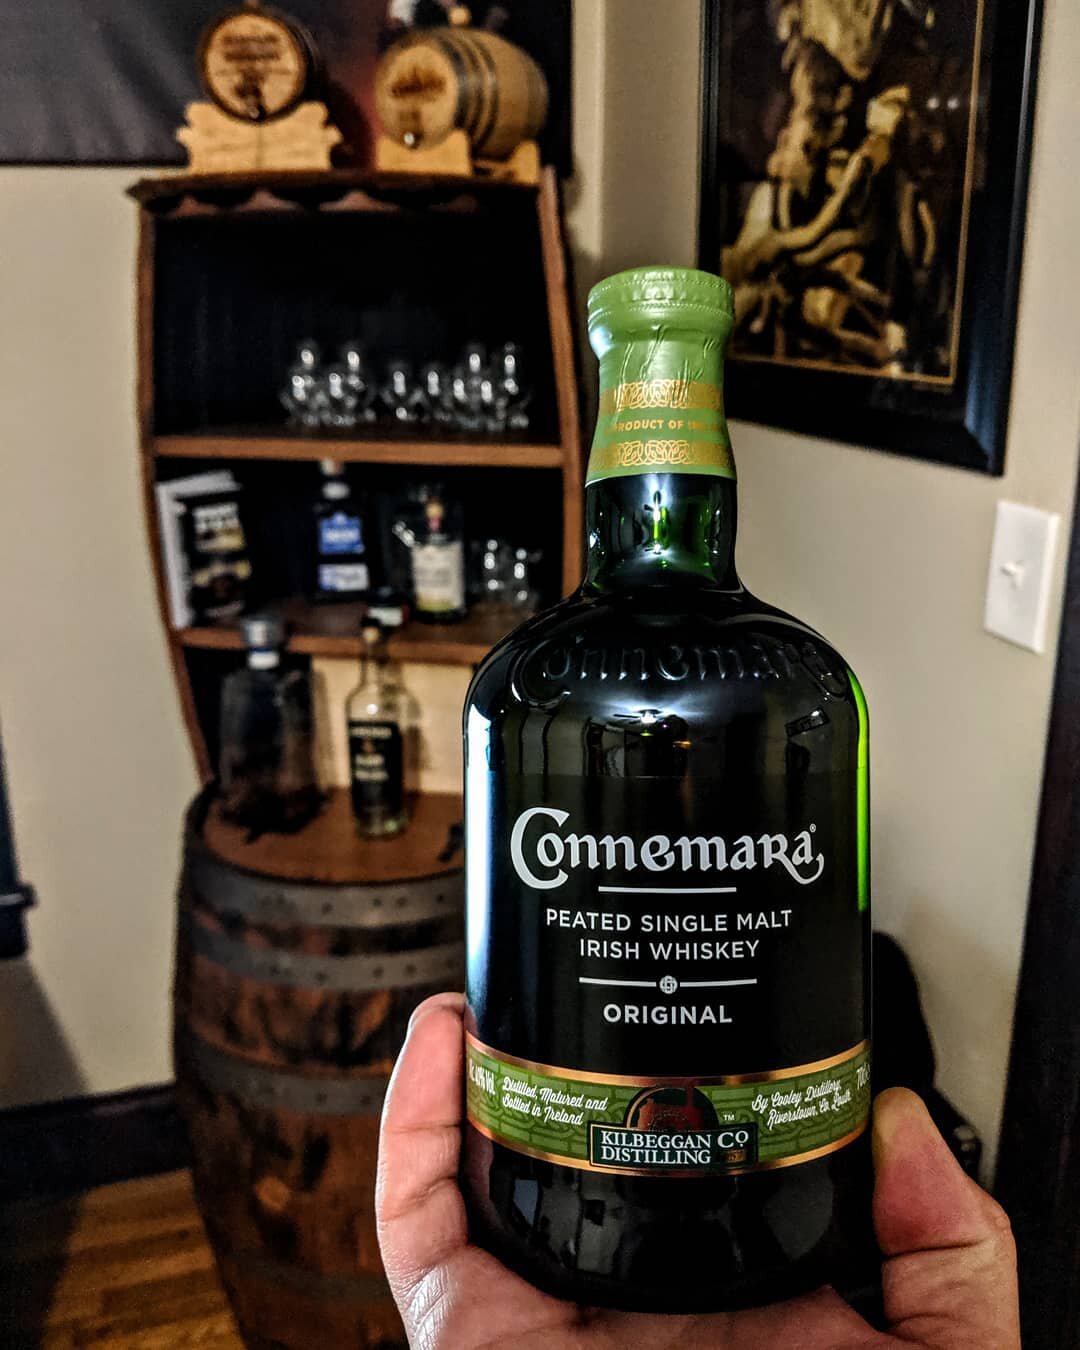 Excited I finally have the masters for the new EP. So, I am celebrating with my favorite Irish whiskey. 
Should have everything ready for the new year. Cheers!

#whisky&nbsp;#whiskey&nbsp;#irishwhiskey&nbsp;#connemaraoriginal&nbsp;#connemarawhiskey #